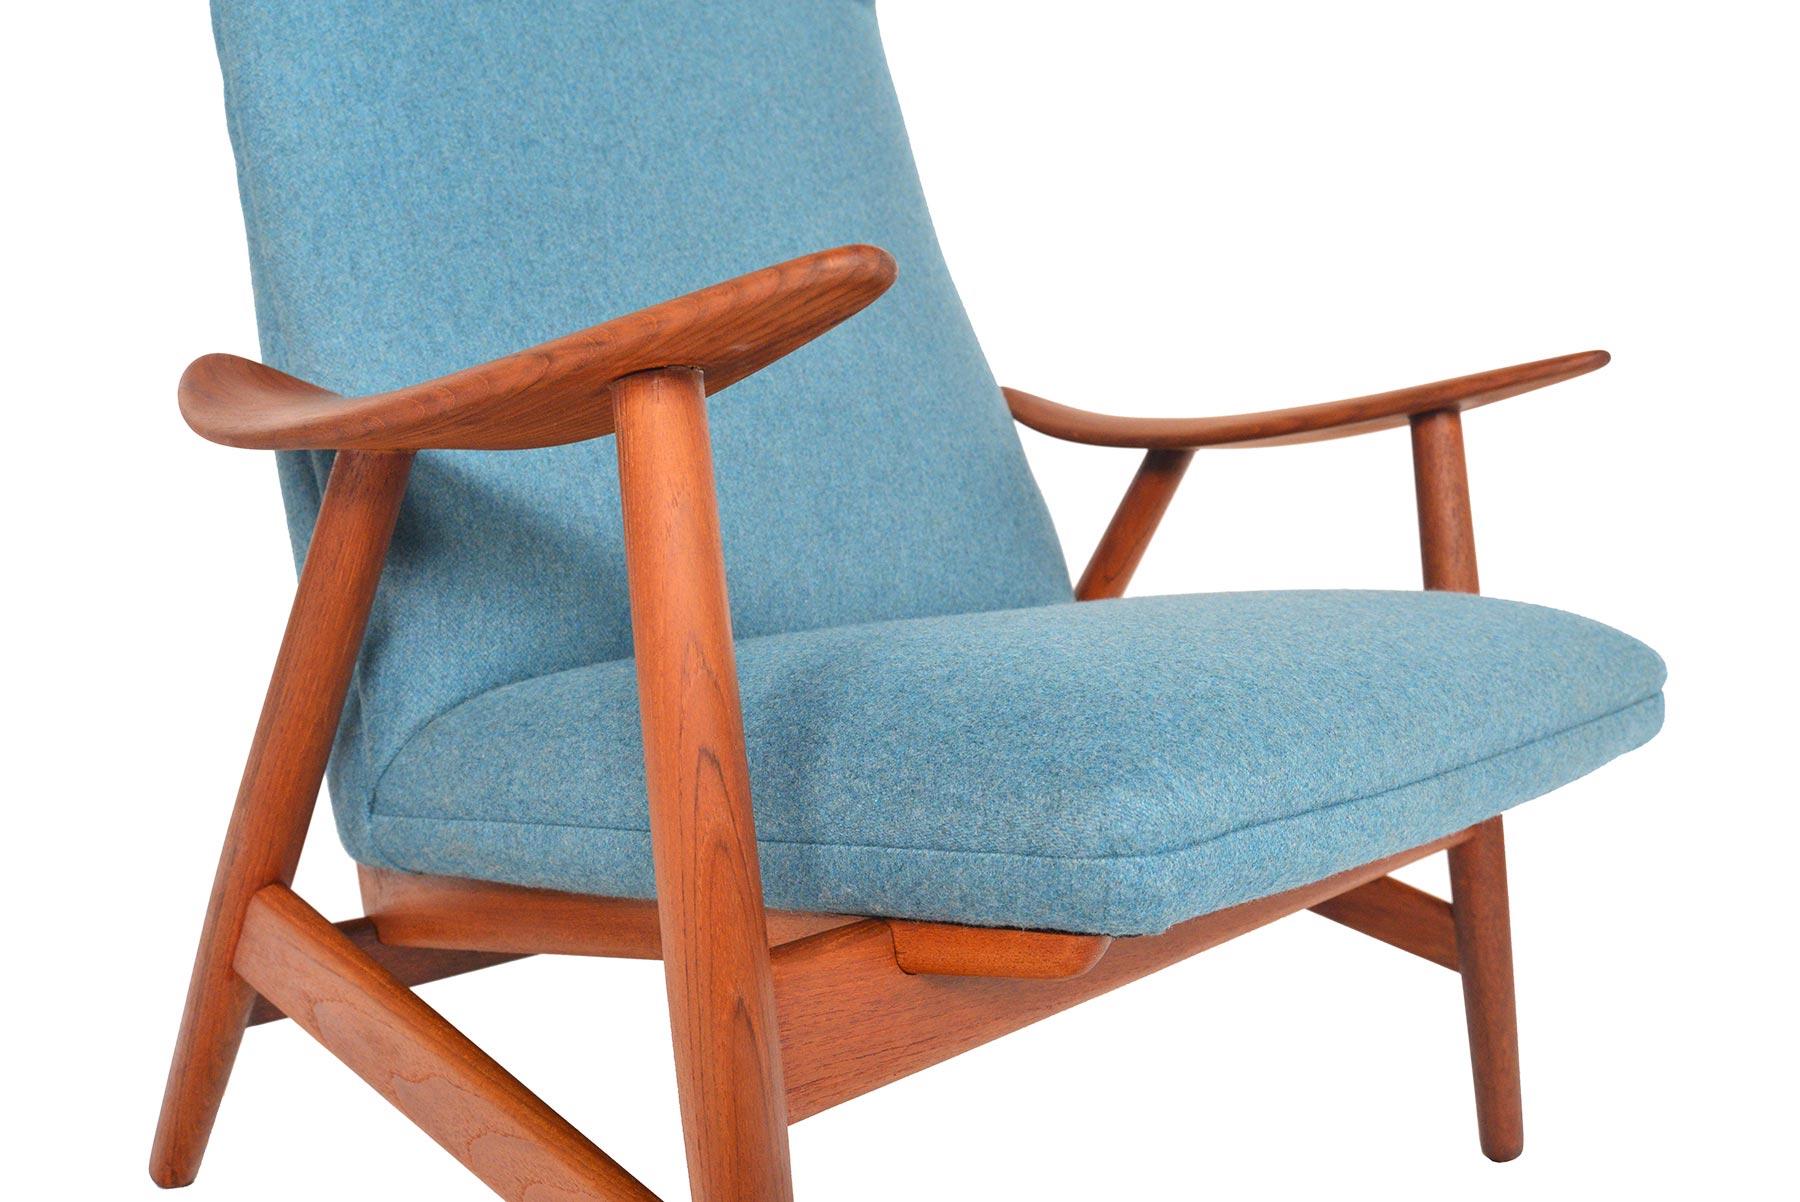 Designed in the late 1950s as Model 10H, this stunning lounge chair by Illum Wikkelso for Søren Willadsen features beautifully sculpted teak arms. Boomerang shaped brackets support this highback design and creates an interesting silhouette from